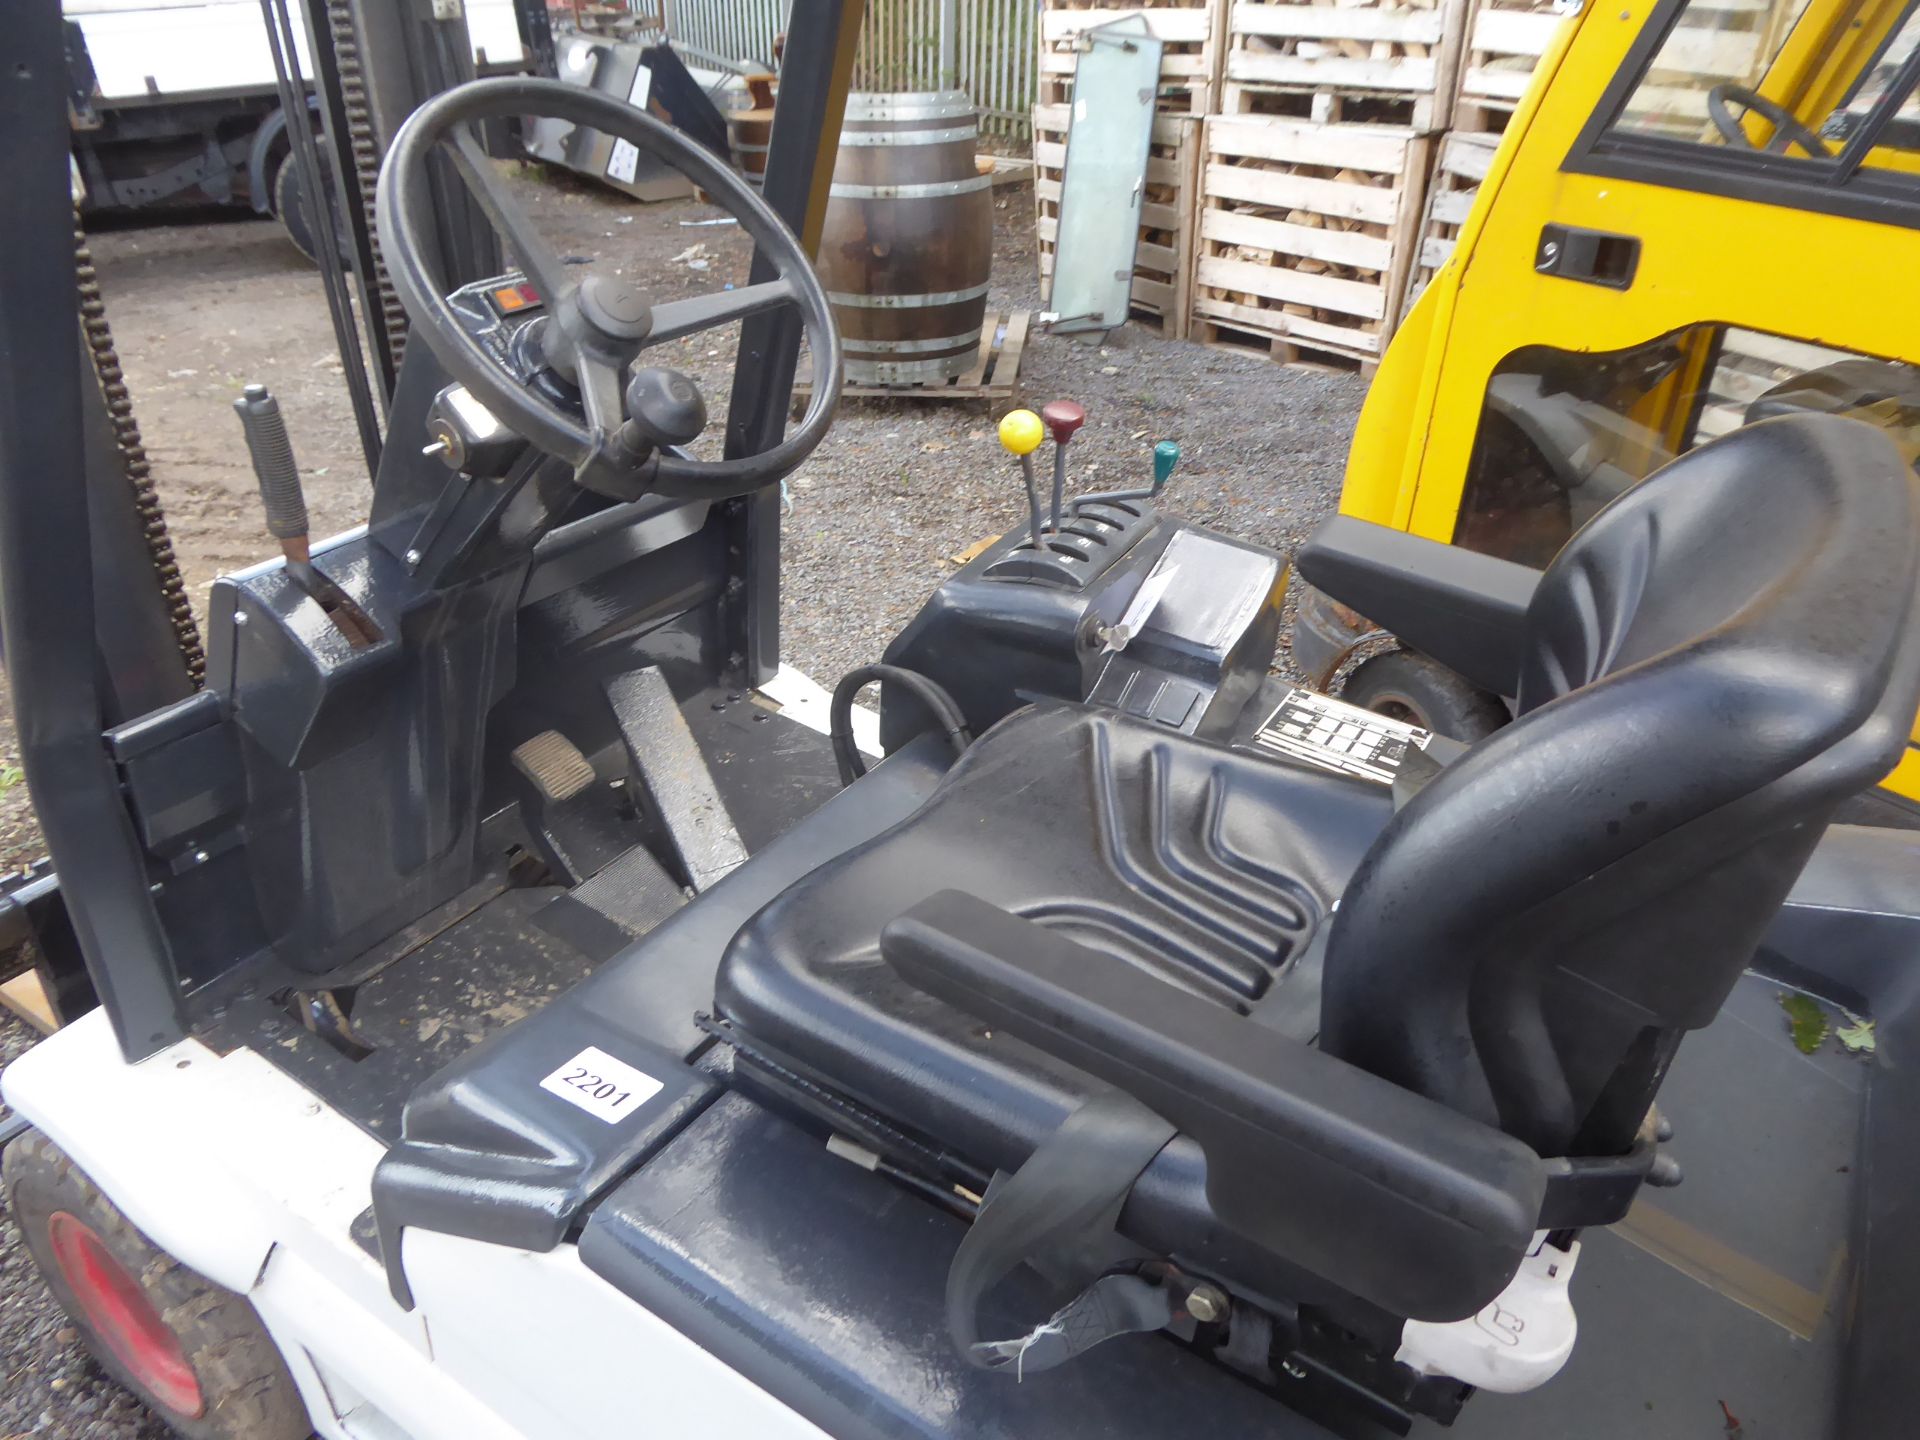 Electric forklift OM EU-17.5. Will lift 1.75T, batteries been changed for some 4 years old. - Image 2 of 3